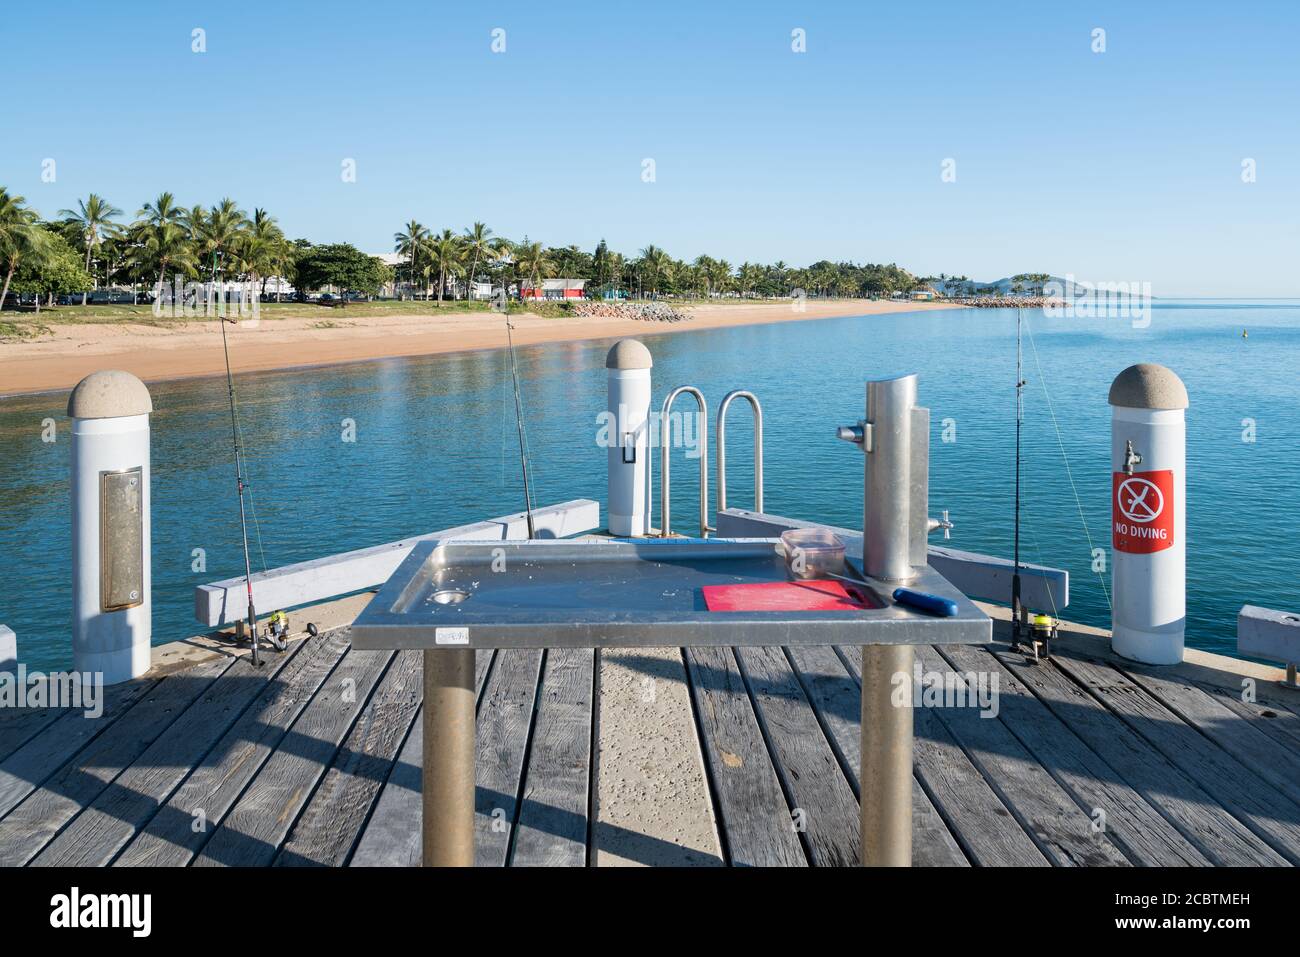 Popular fishing spot with fish cleaning station on the jetty at The Strand, Townsville, Australia Stock Photo